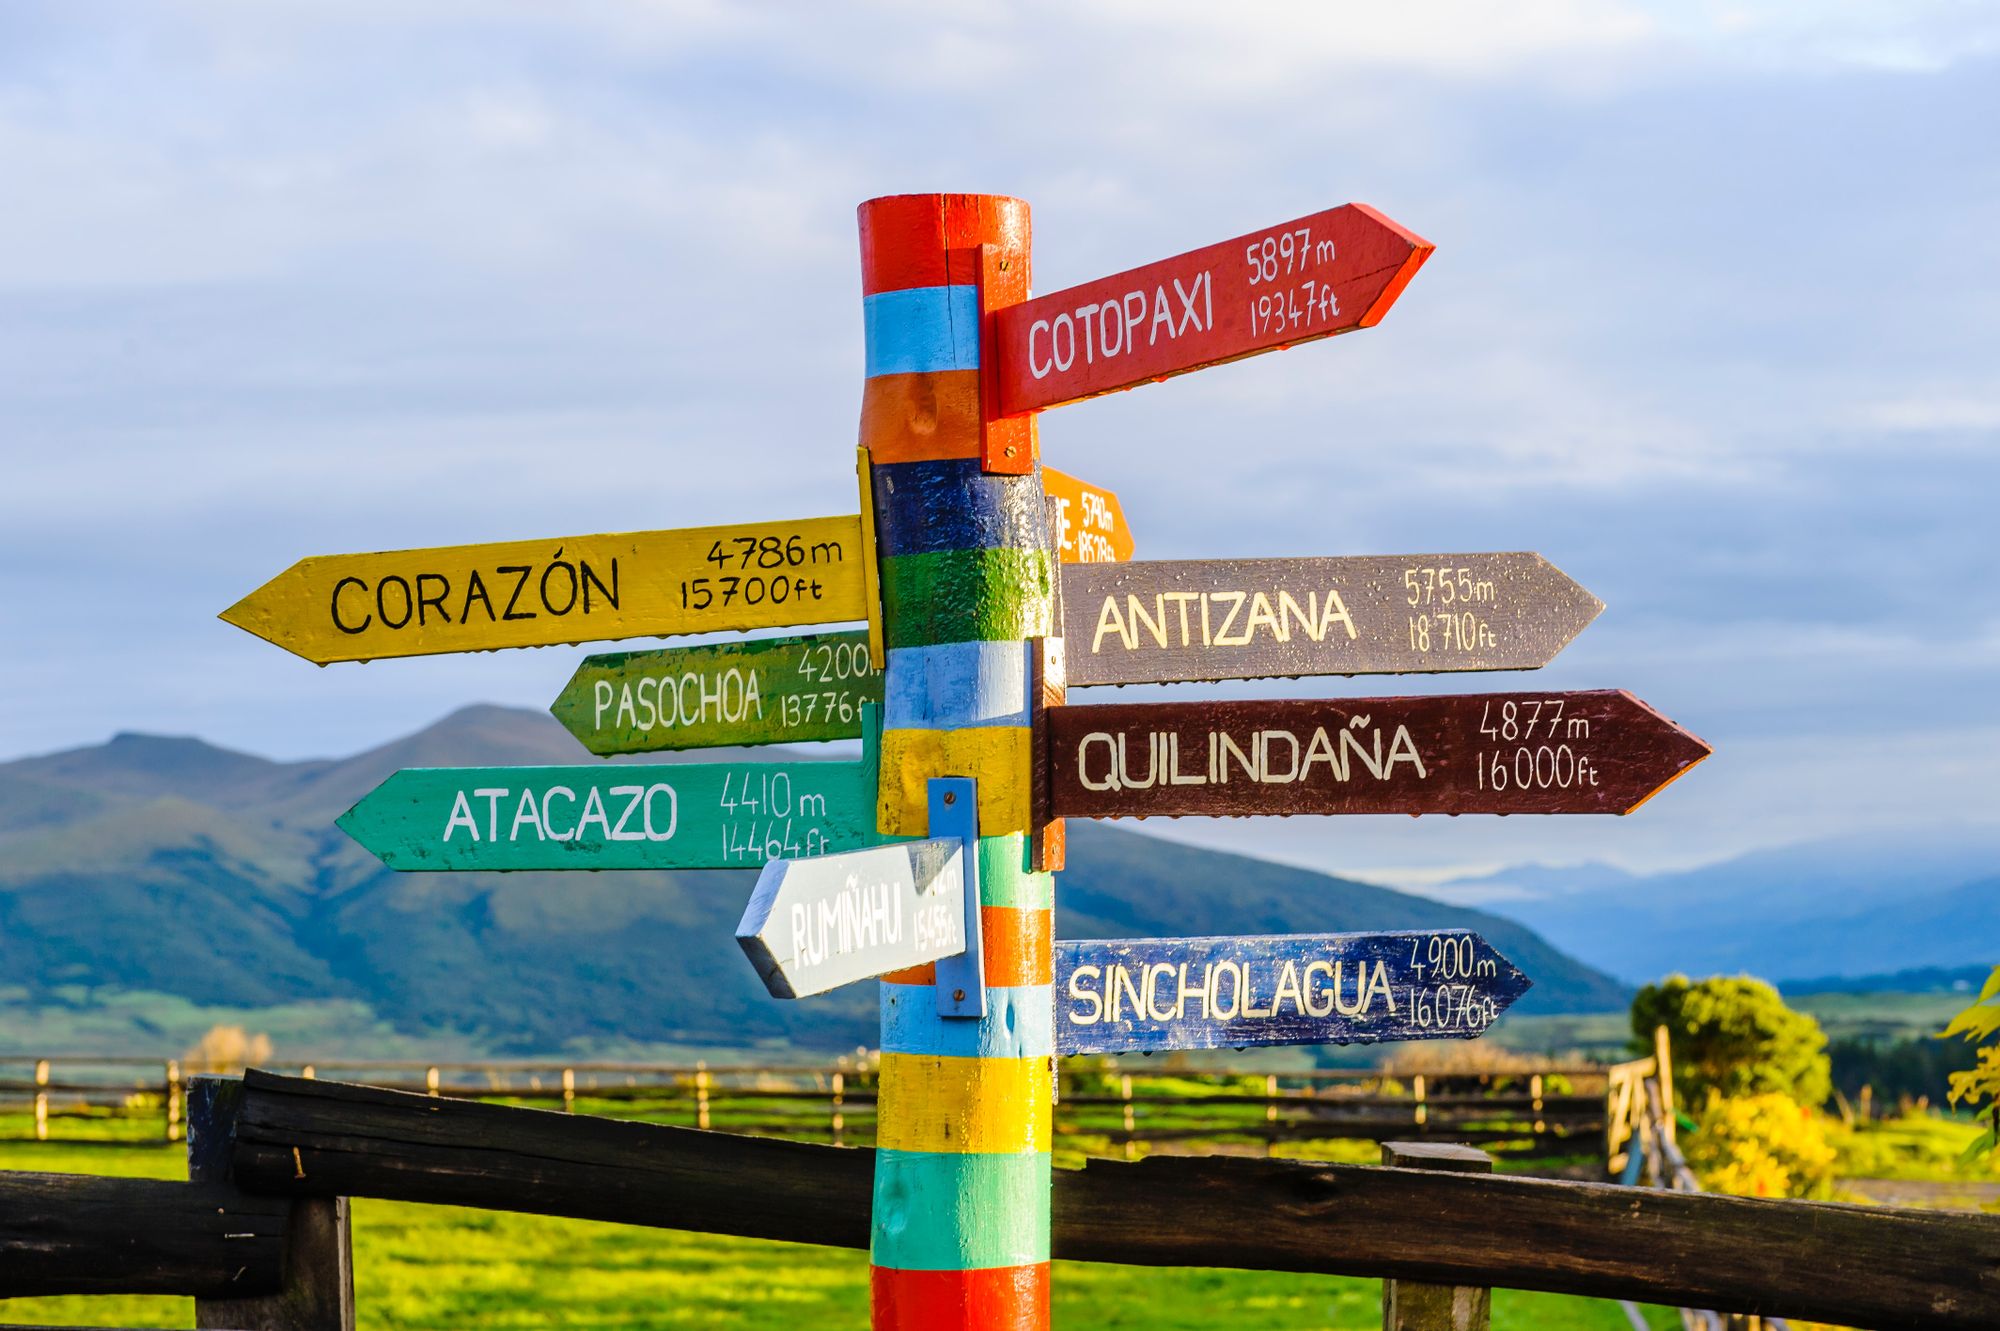 A signpost shows distances to other locations in Ecuador